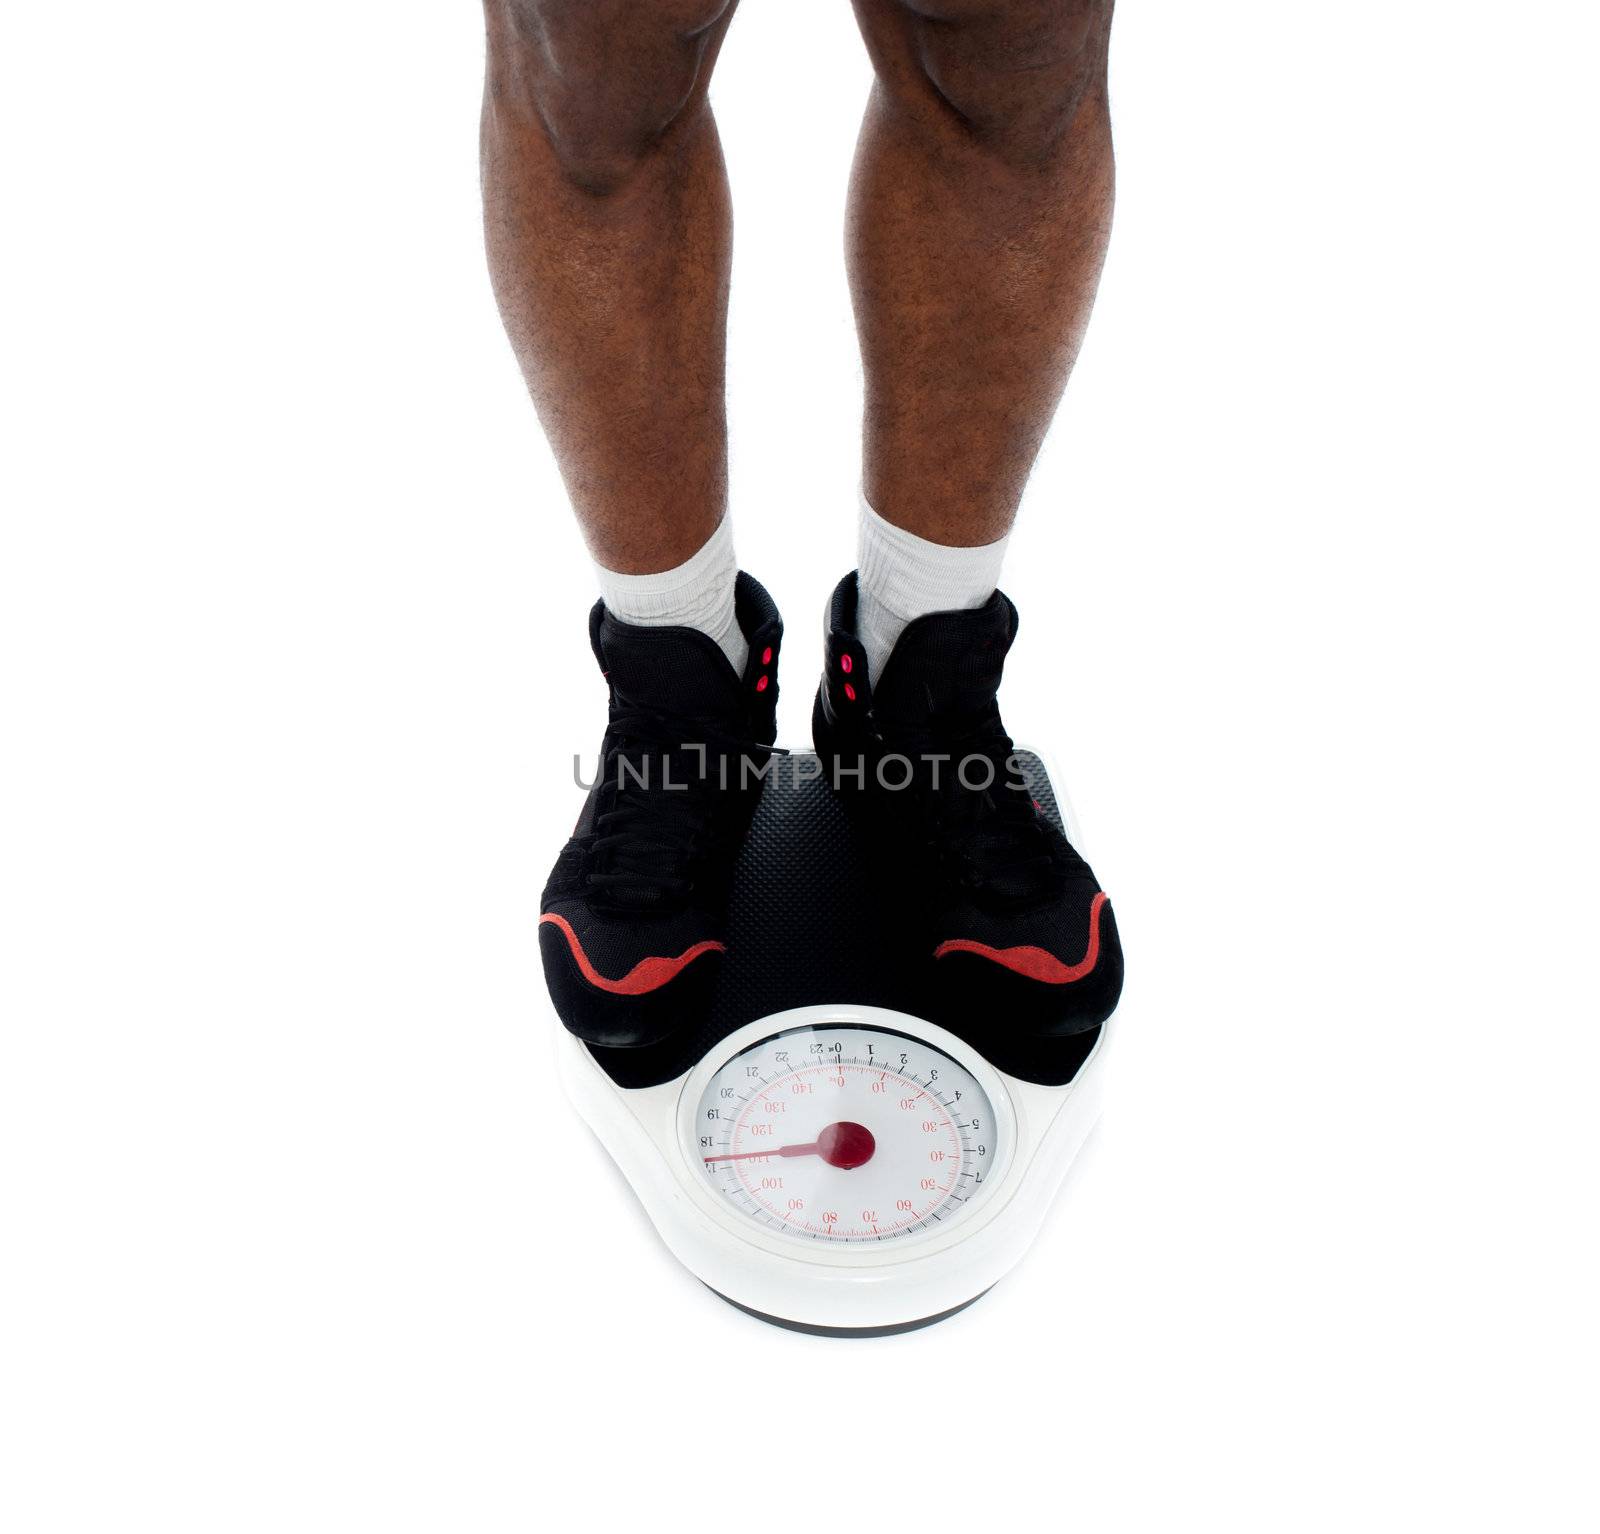 Man's feet on weighing scale isolated over white. Closeup